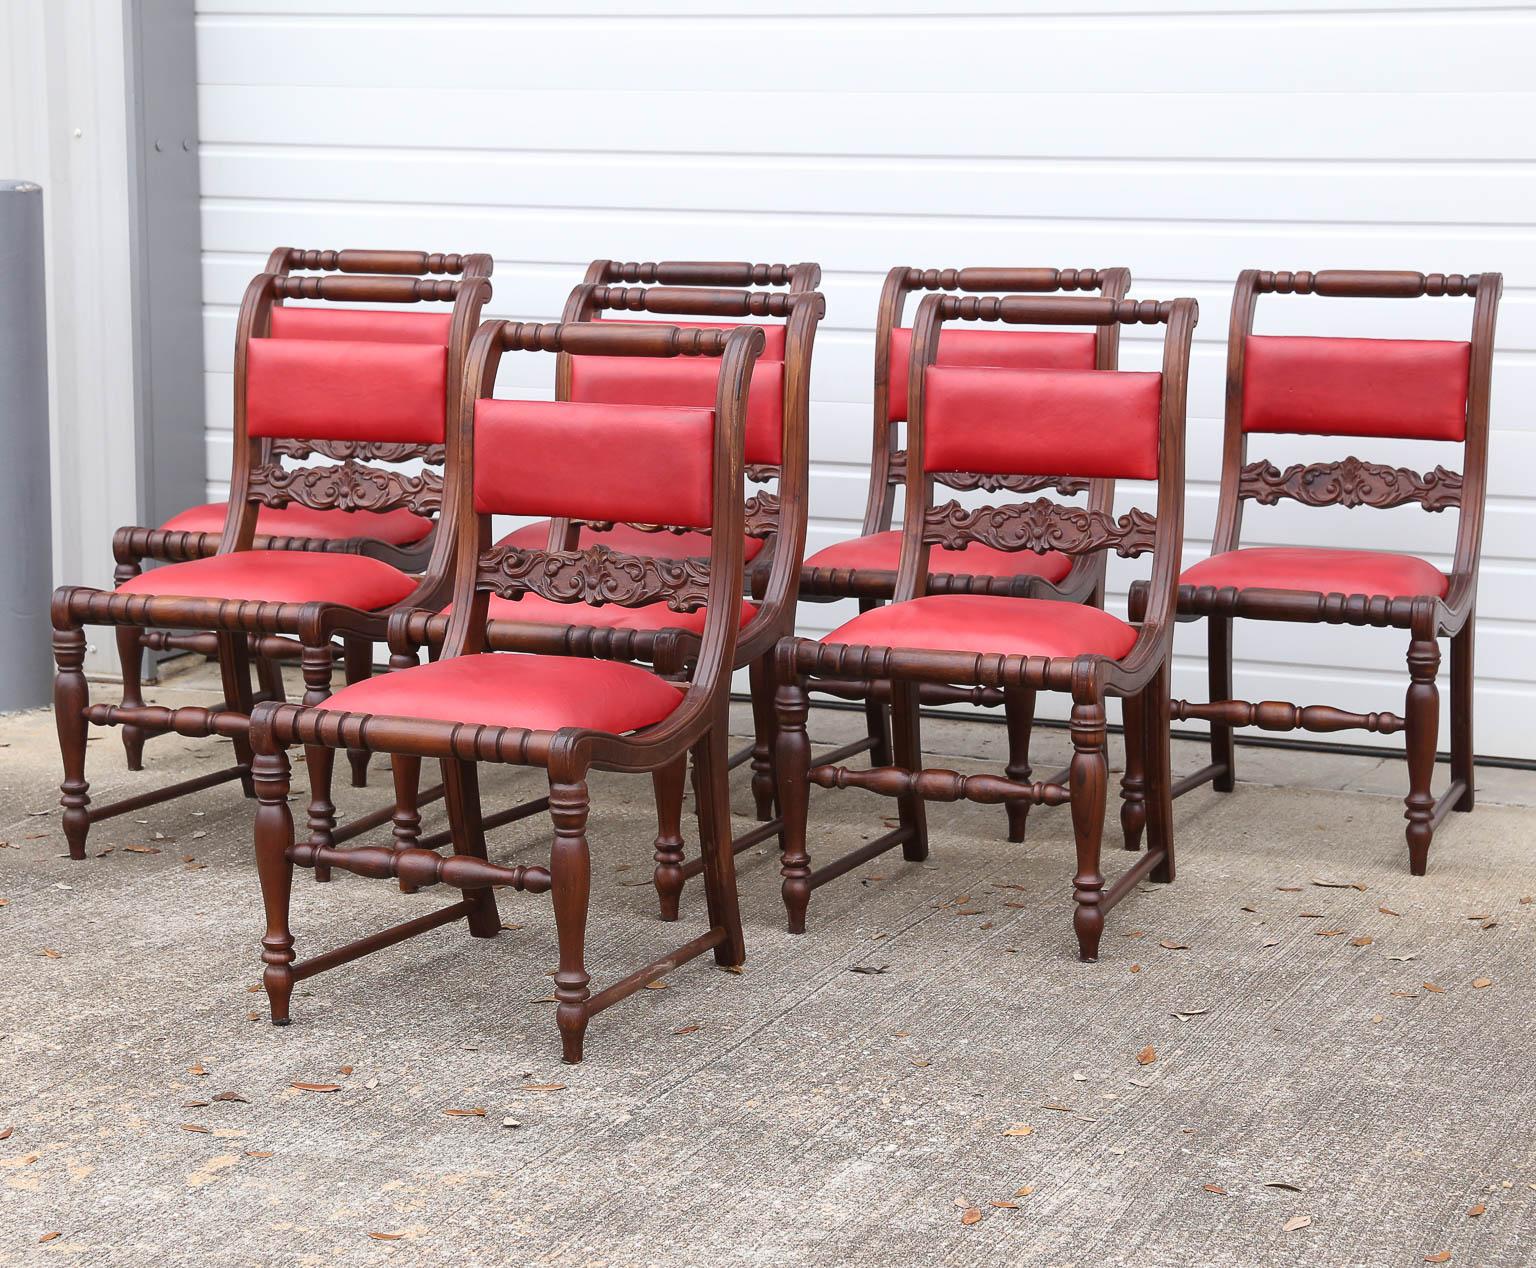 Set of modern ten teak wood and leather dining chairs. These are handcrafted in old world carpentry. Elegant and comfortable these ten chairs will light up any ceremonial dining halls.
Offered by one of the largest dealer in colonial furniture.